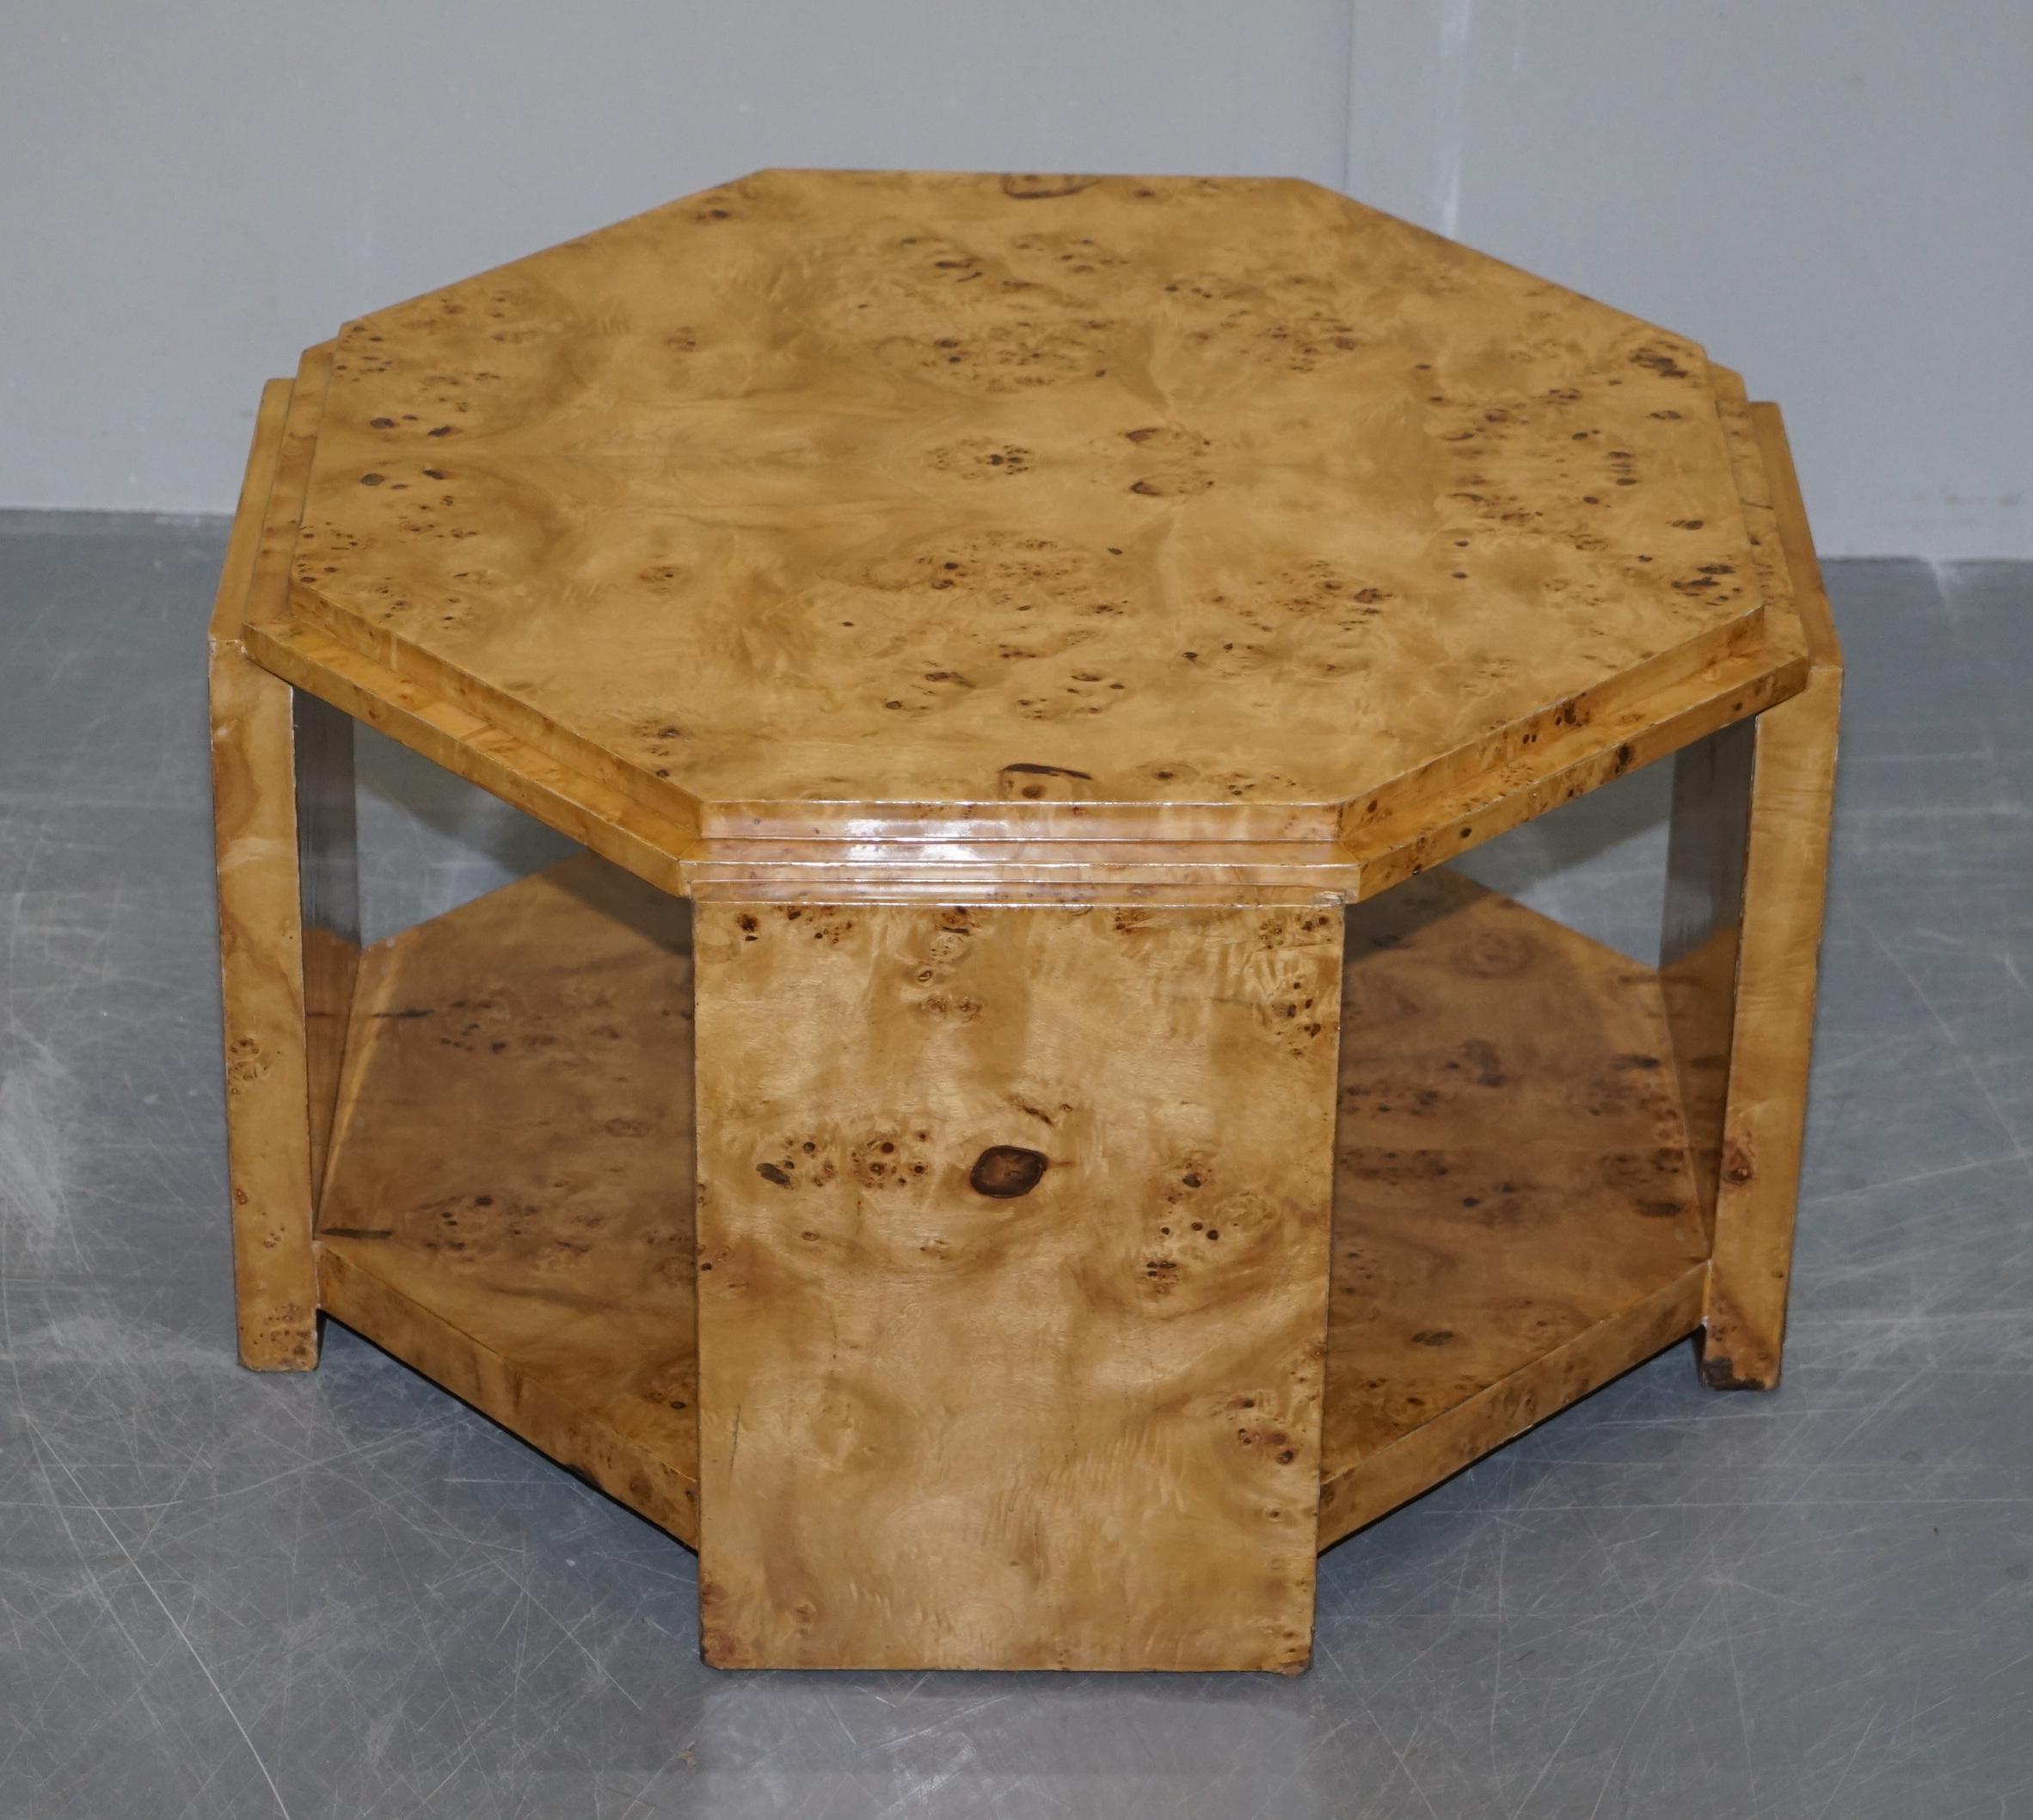 We are delighted to offer for sale this lovely Art Deco style octagonal coffee table

A very well made and decorative piece, in the Art Deco style after a design by Harry & Lou Epstein. I have the matching console table and 6 dining chairs listed